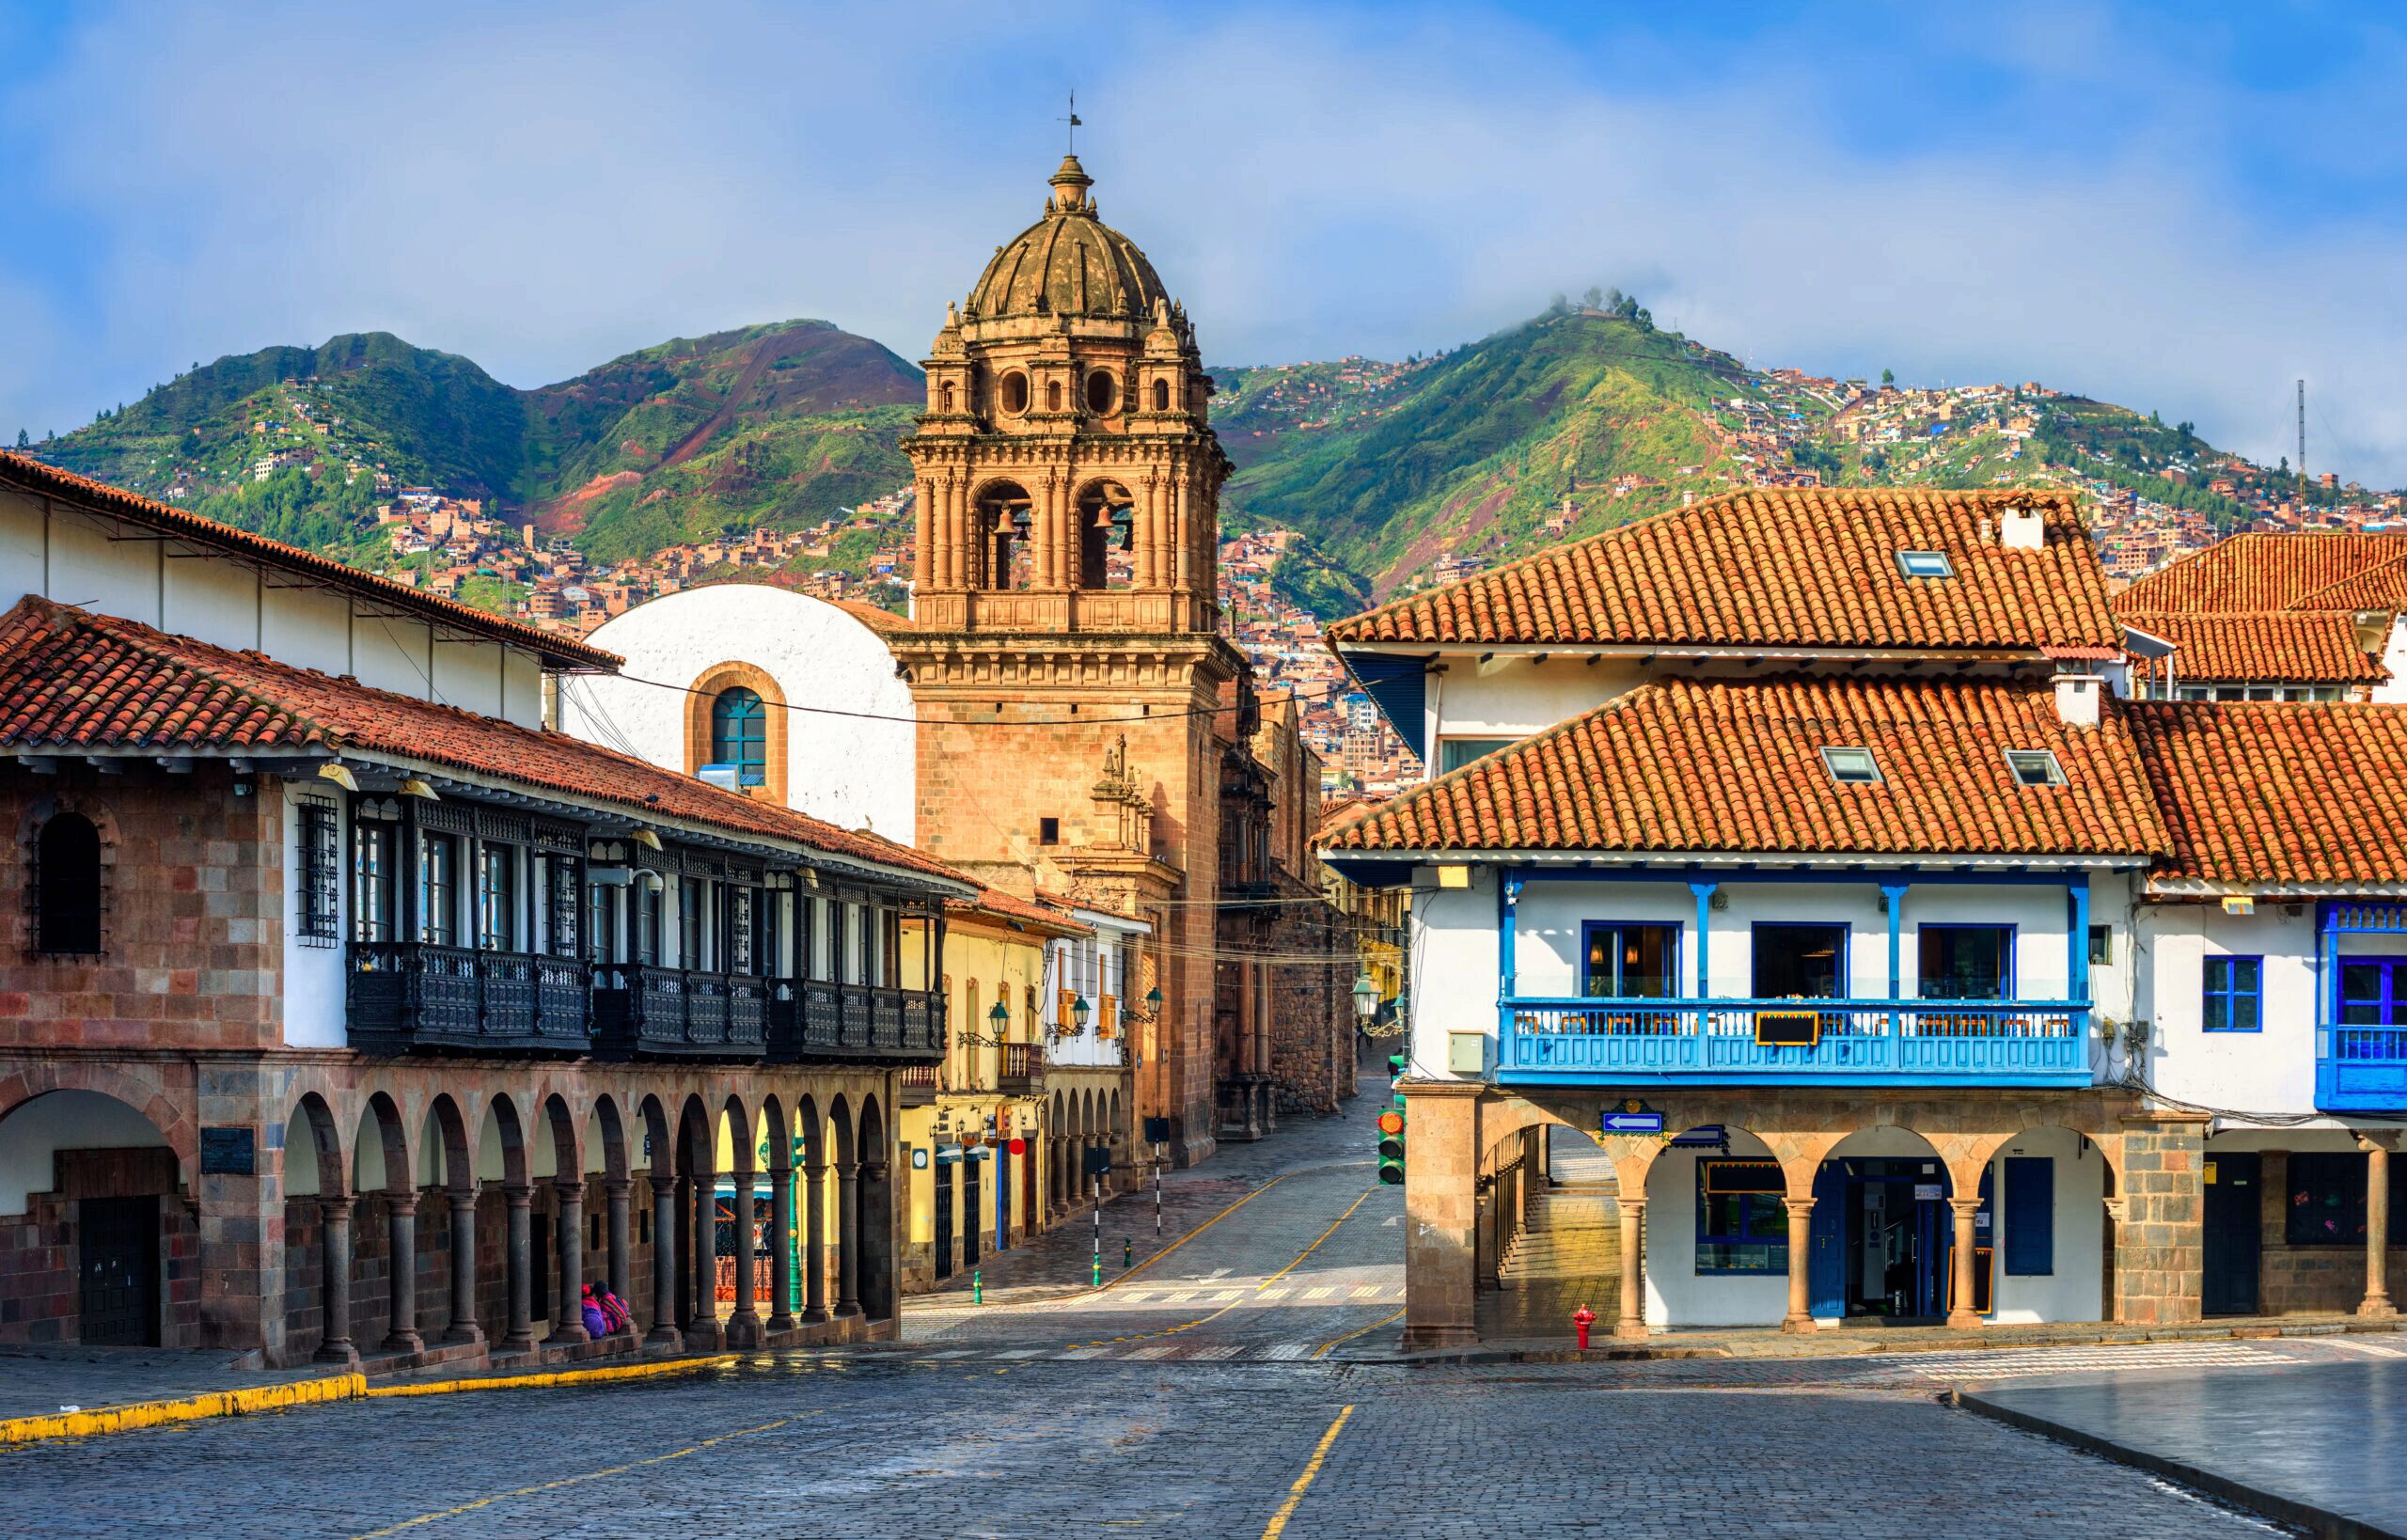 Decorative image of the Plaza Mayor And Basilica Menor Church in the foreground and big green mountains in the background under a bright blue sky